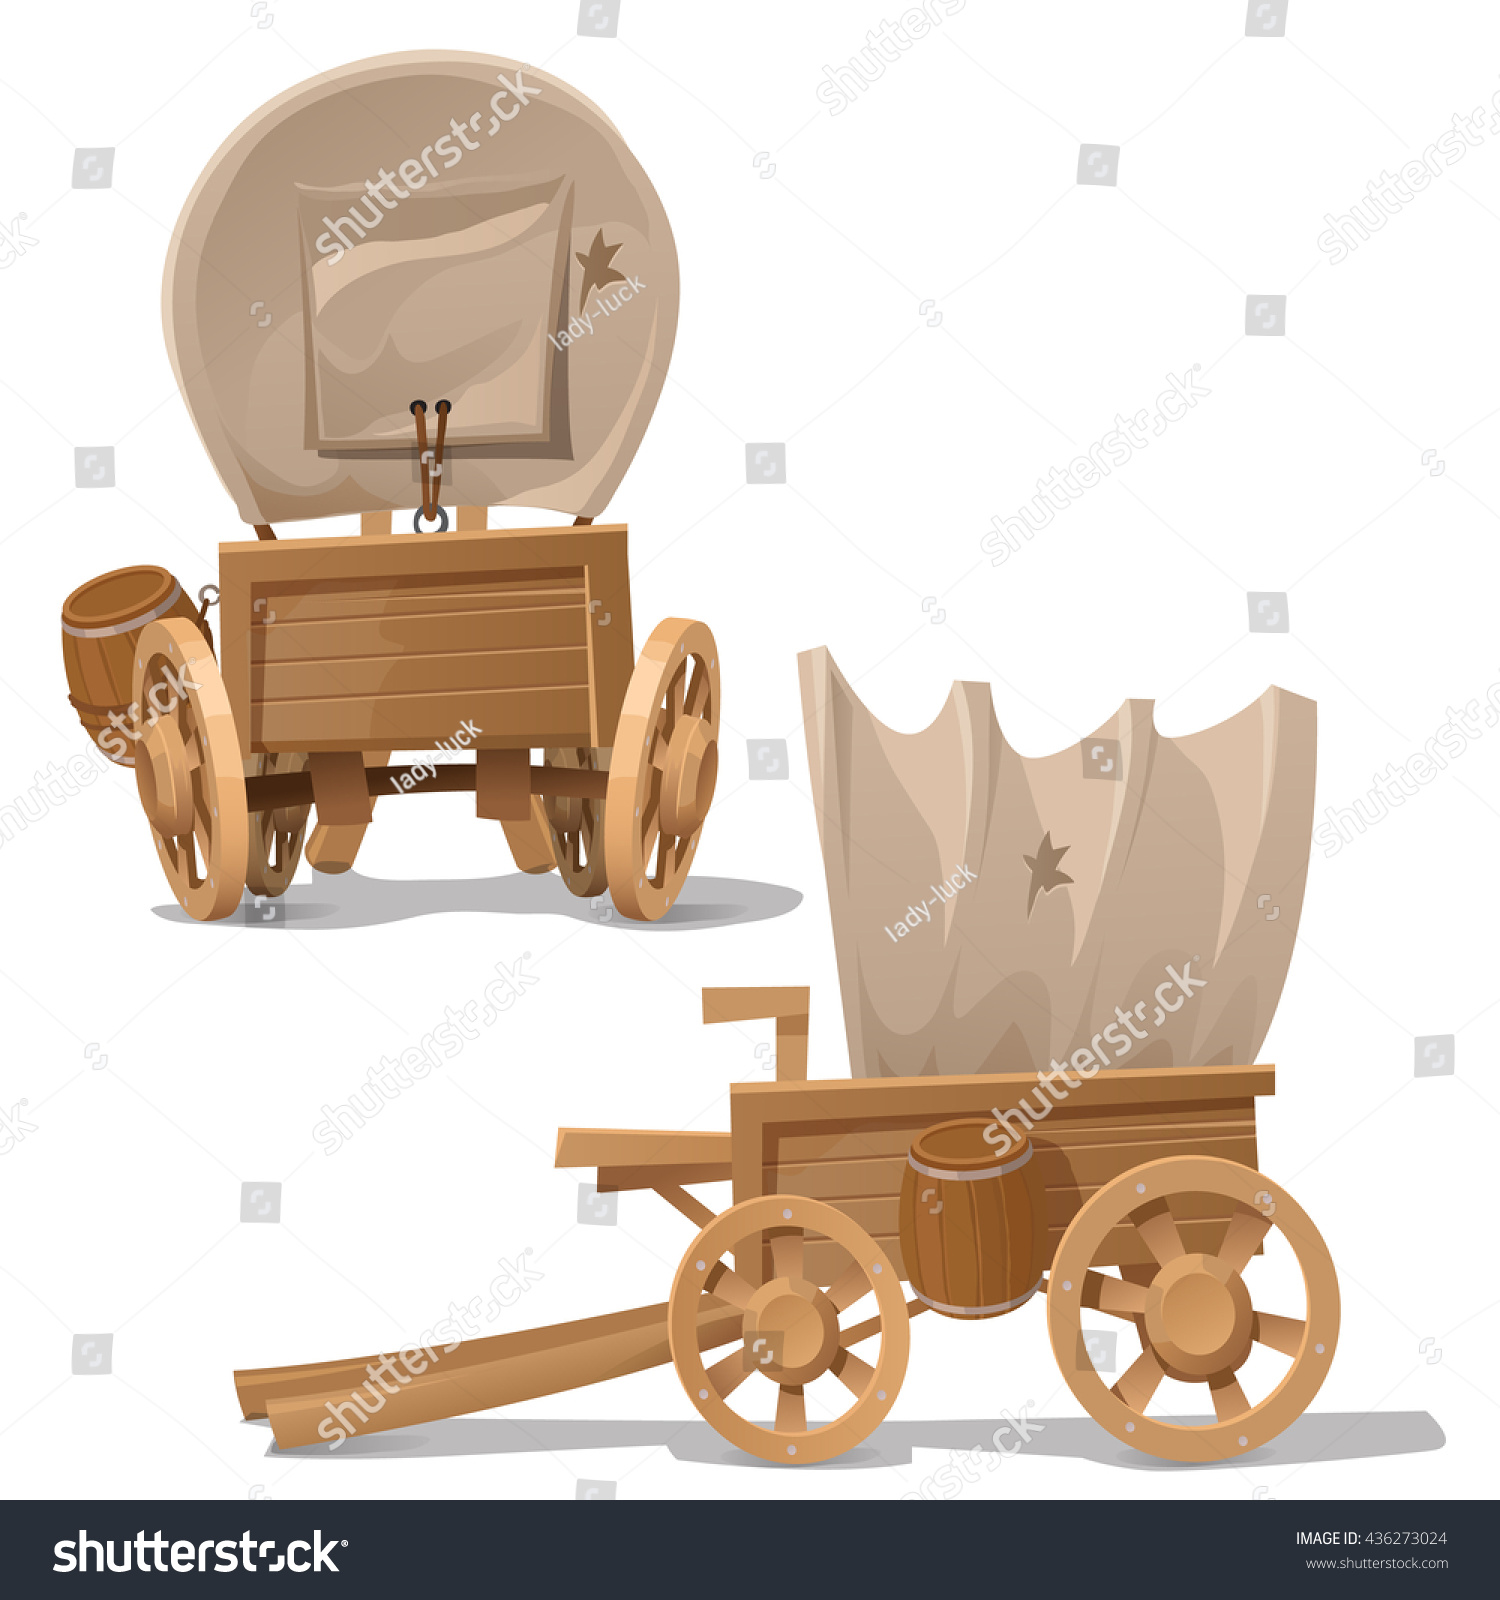 SVG of The wagon in the wild West style isolated on a white background. Cartoon vector close-up illustration. svg